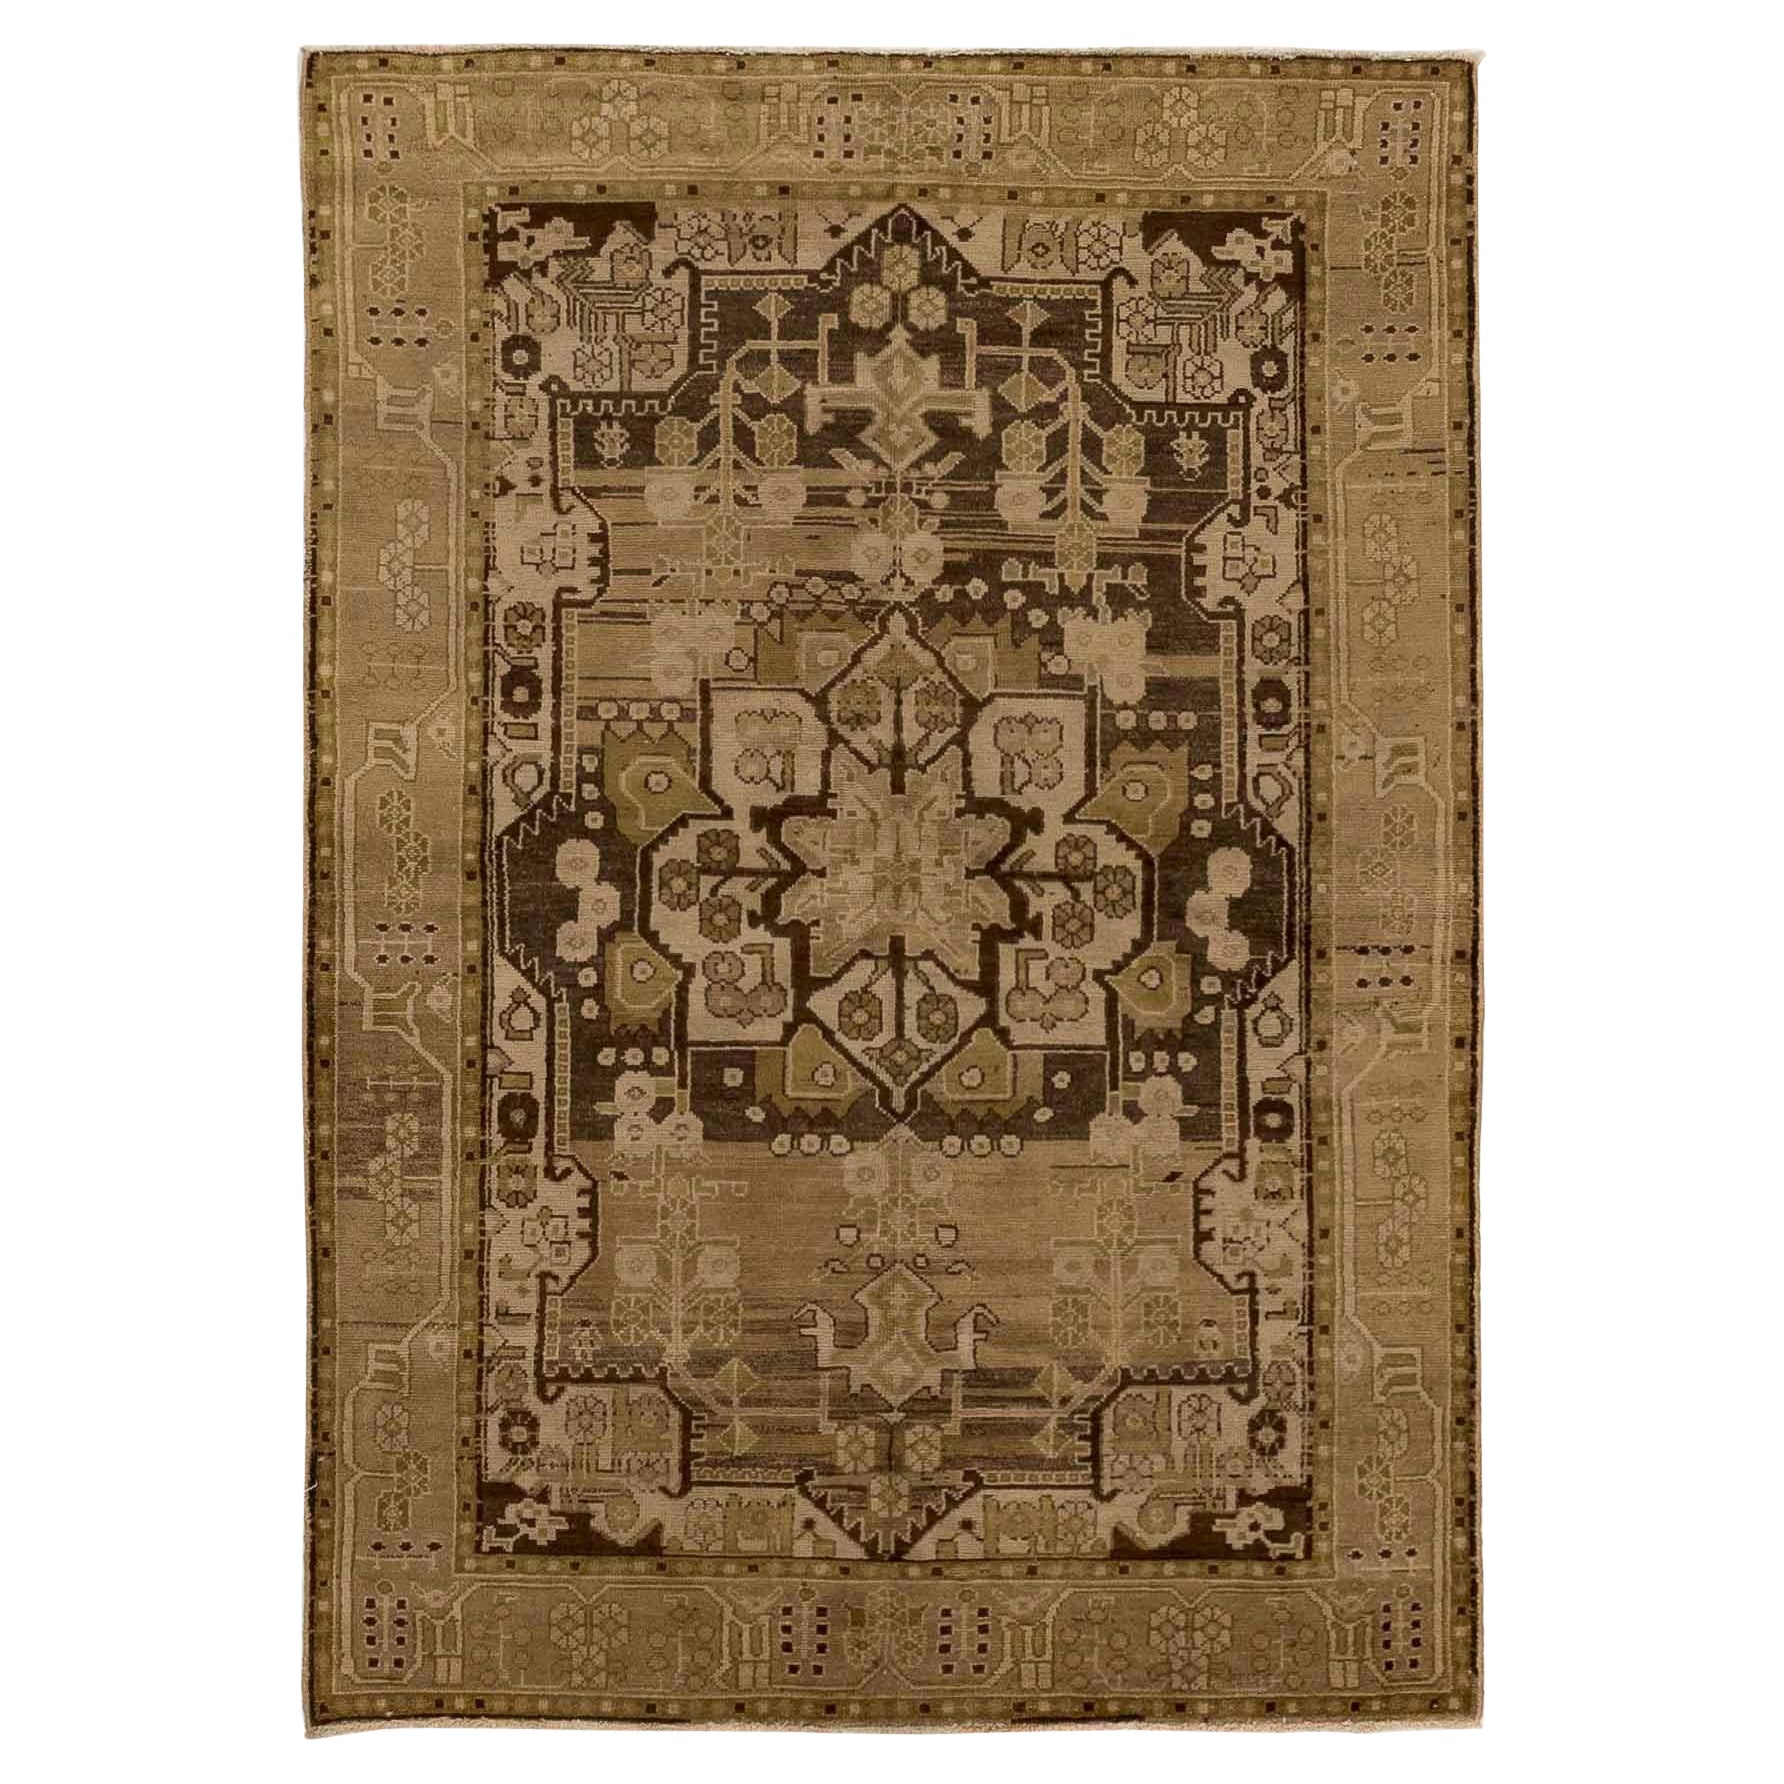 Antique Persian Area Rug Malayer Design, For Sale